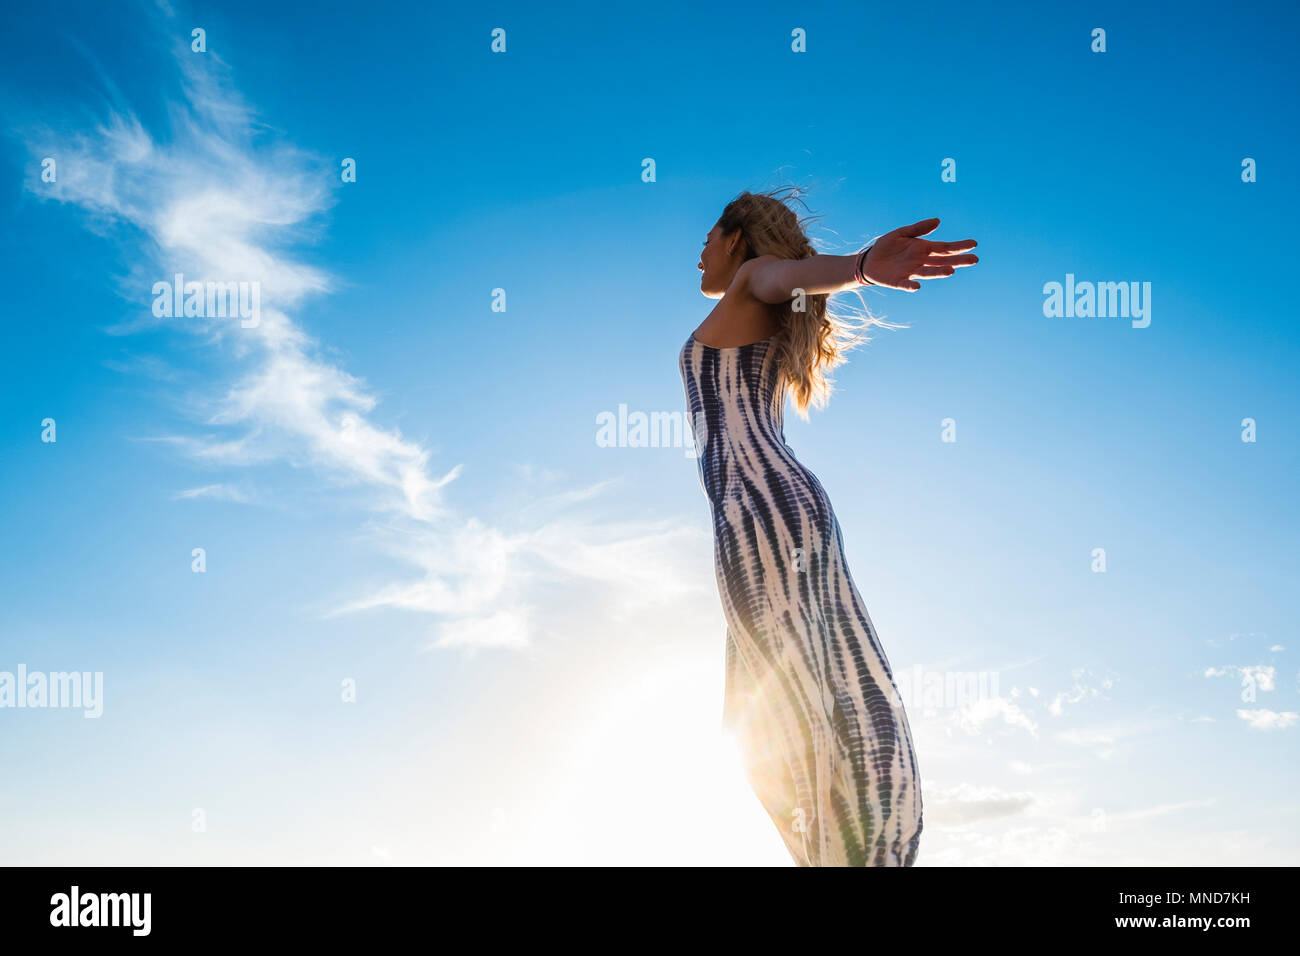 Young nice woman enjoy her freedom opening arms. Independent life and great feel with the world. Embrace all with satisfaction. Tenerife soul. Stock Photo